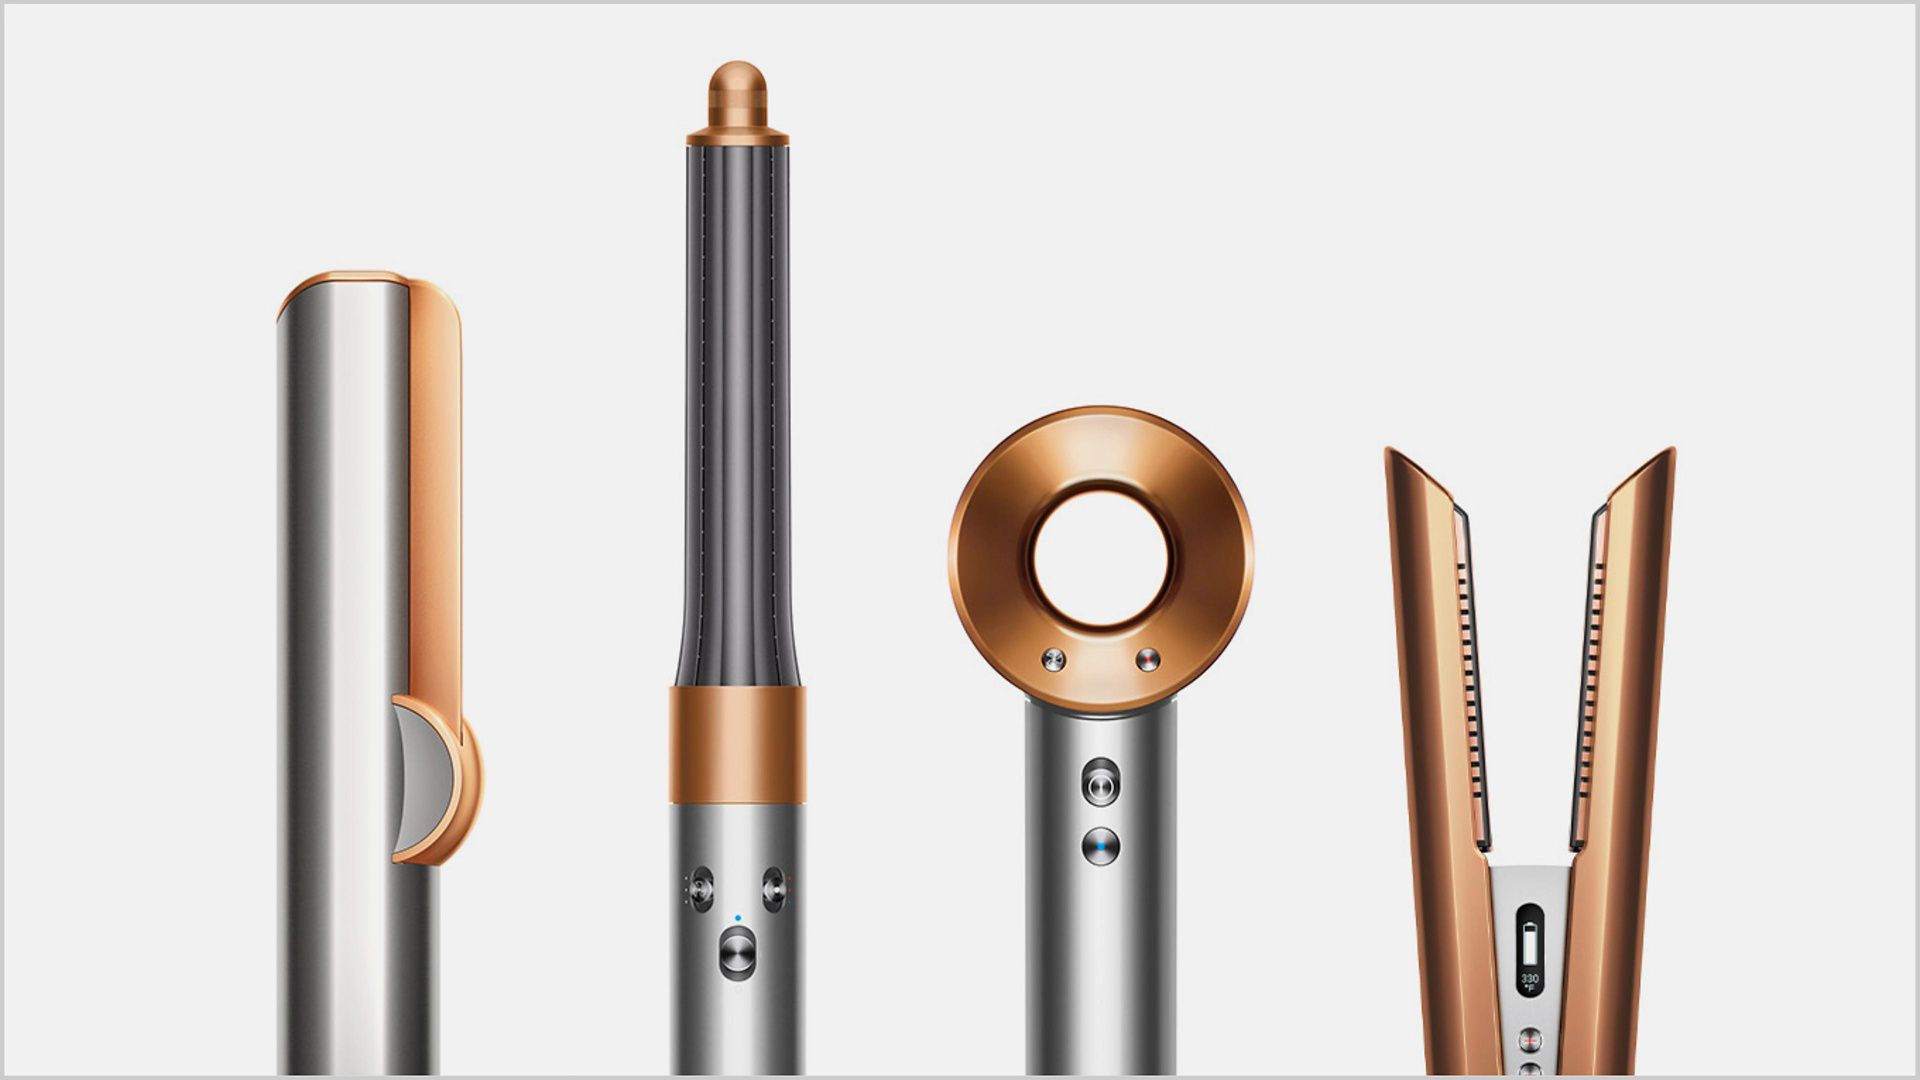 Image of the Dyson hair care range